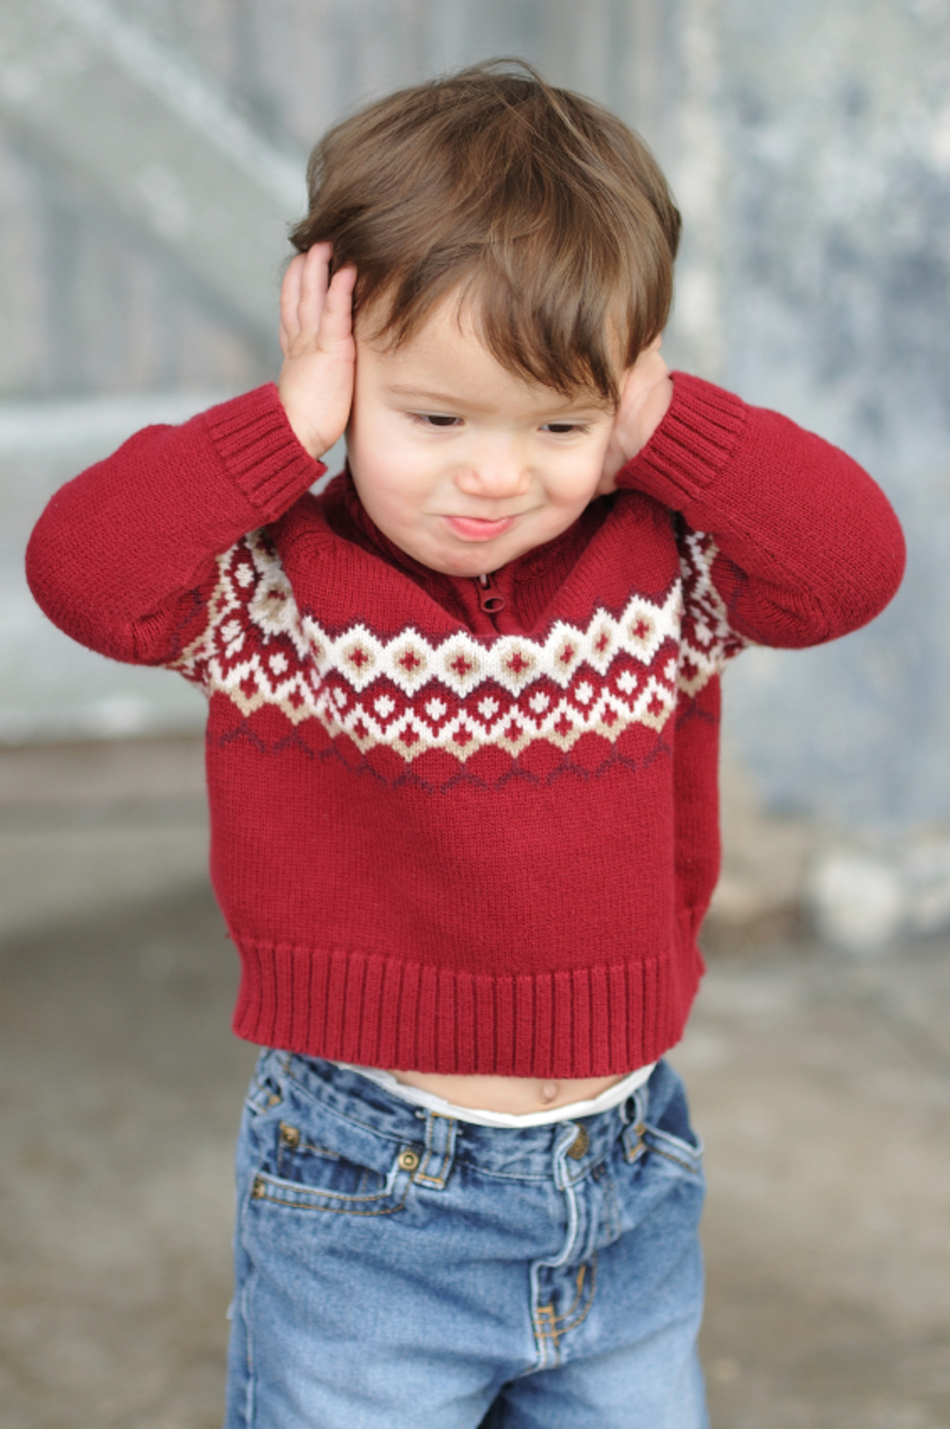 Your Troubled Child Could Have Oppositional Defiant Disorder